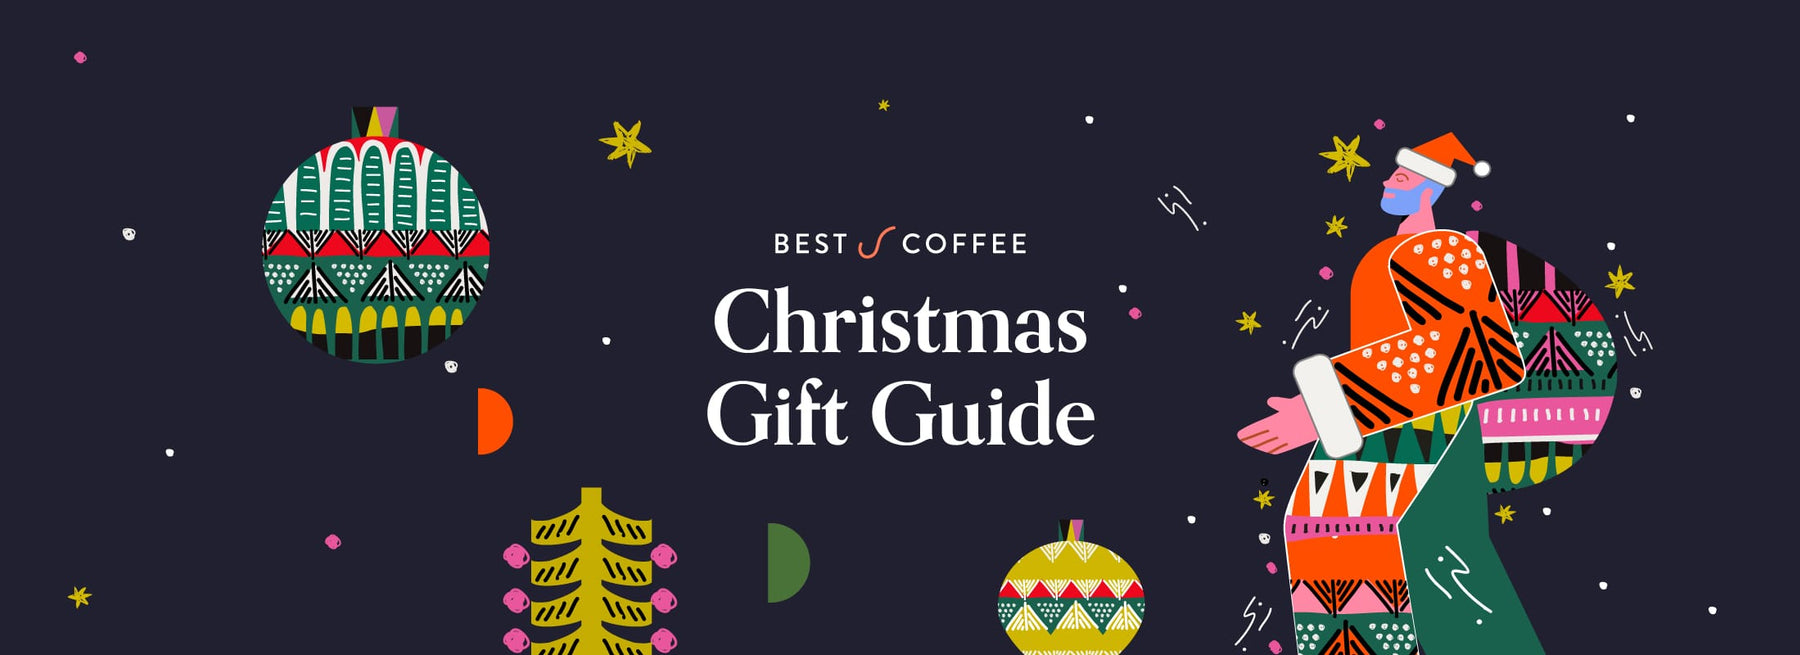 Best Coffee Christmas Gift Guide